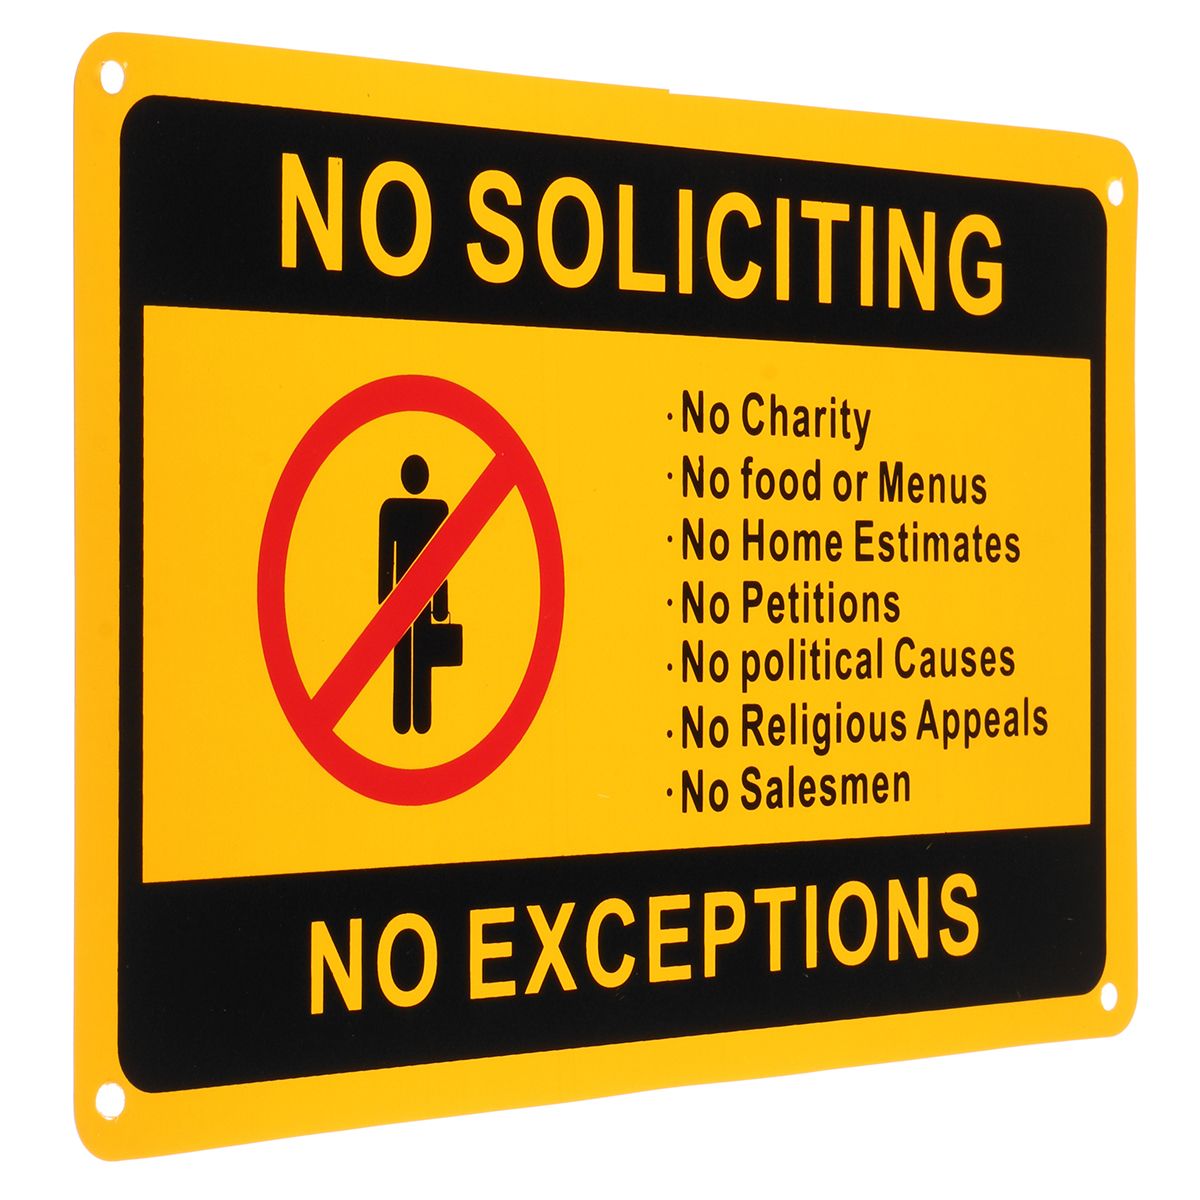 28x18cm-No-Soliciting-No-Exceptions-Front-Door-Sign-Security-Warning-Sticker-Waterproof-1386793